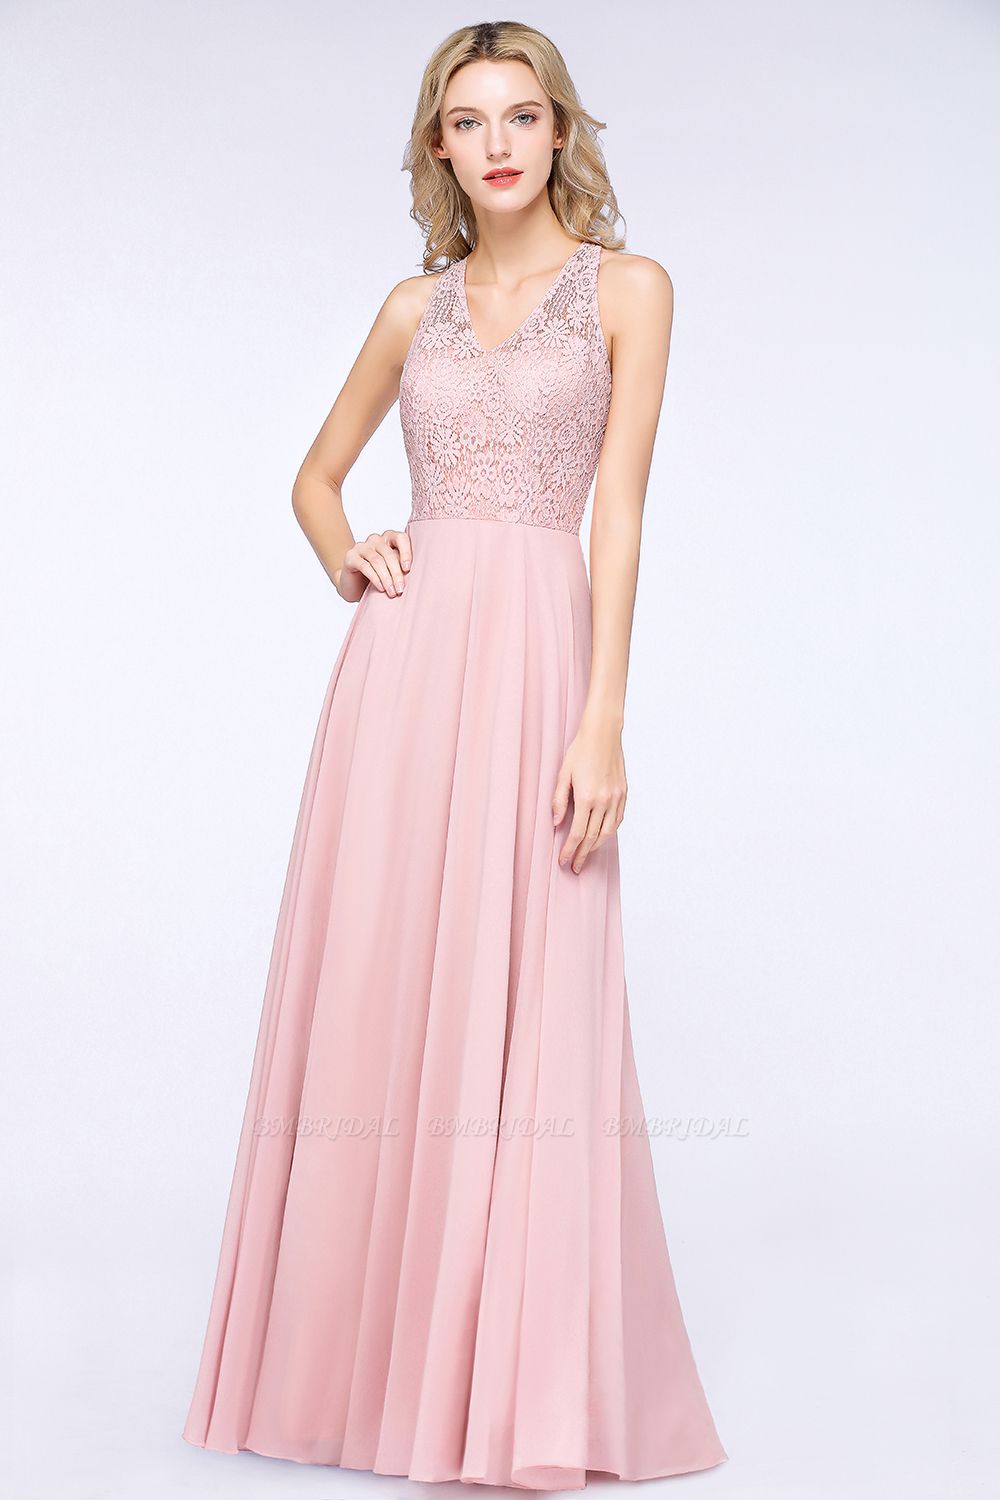 BMbridal.com provides Styles and Colors of the Bridesmaid Dresses to Choose from 